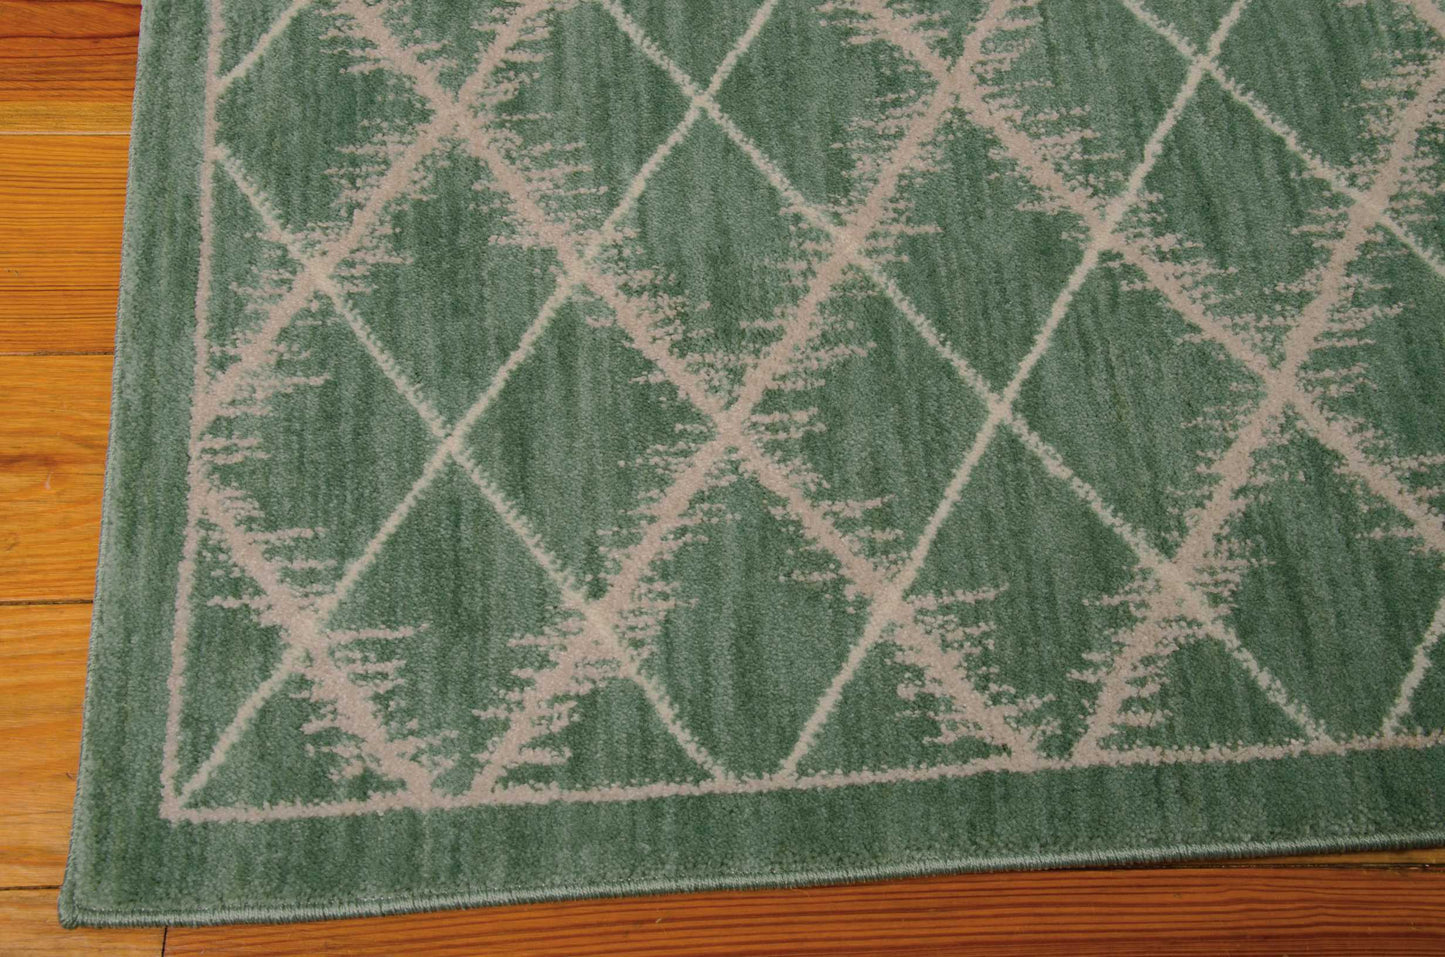 Nourison Home Tranquility TNQ01 Light Green  Transitional Machinemade Rug